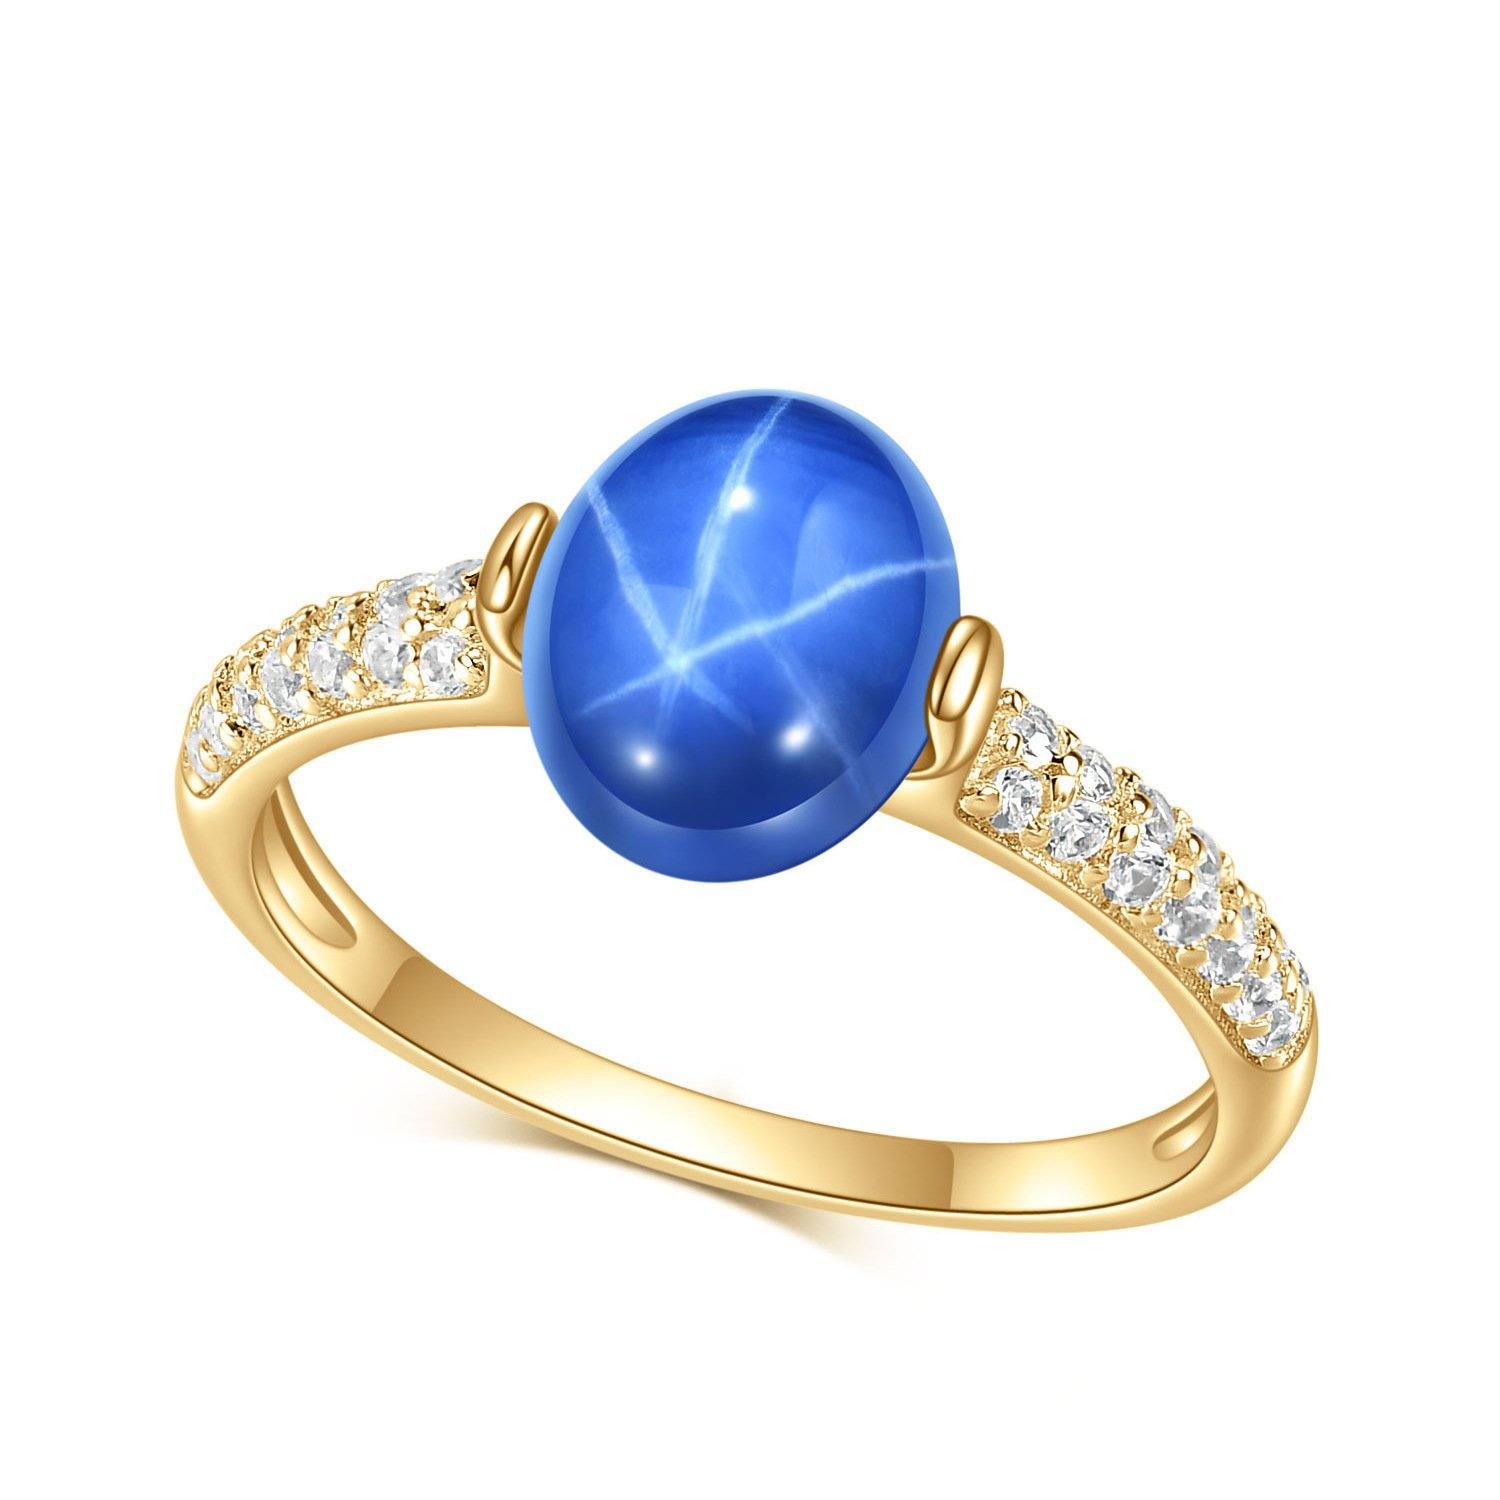 Star Sapphire Ring - HER'S